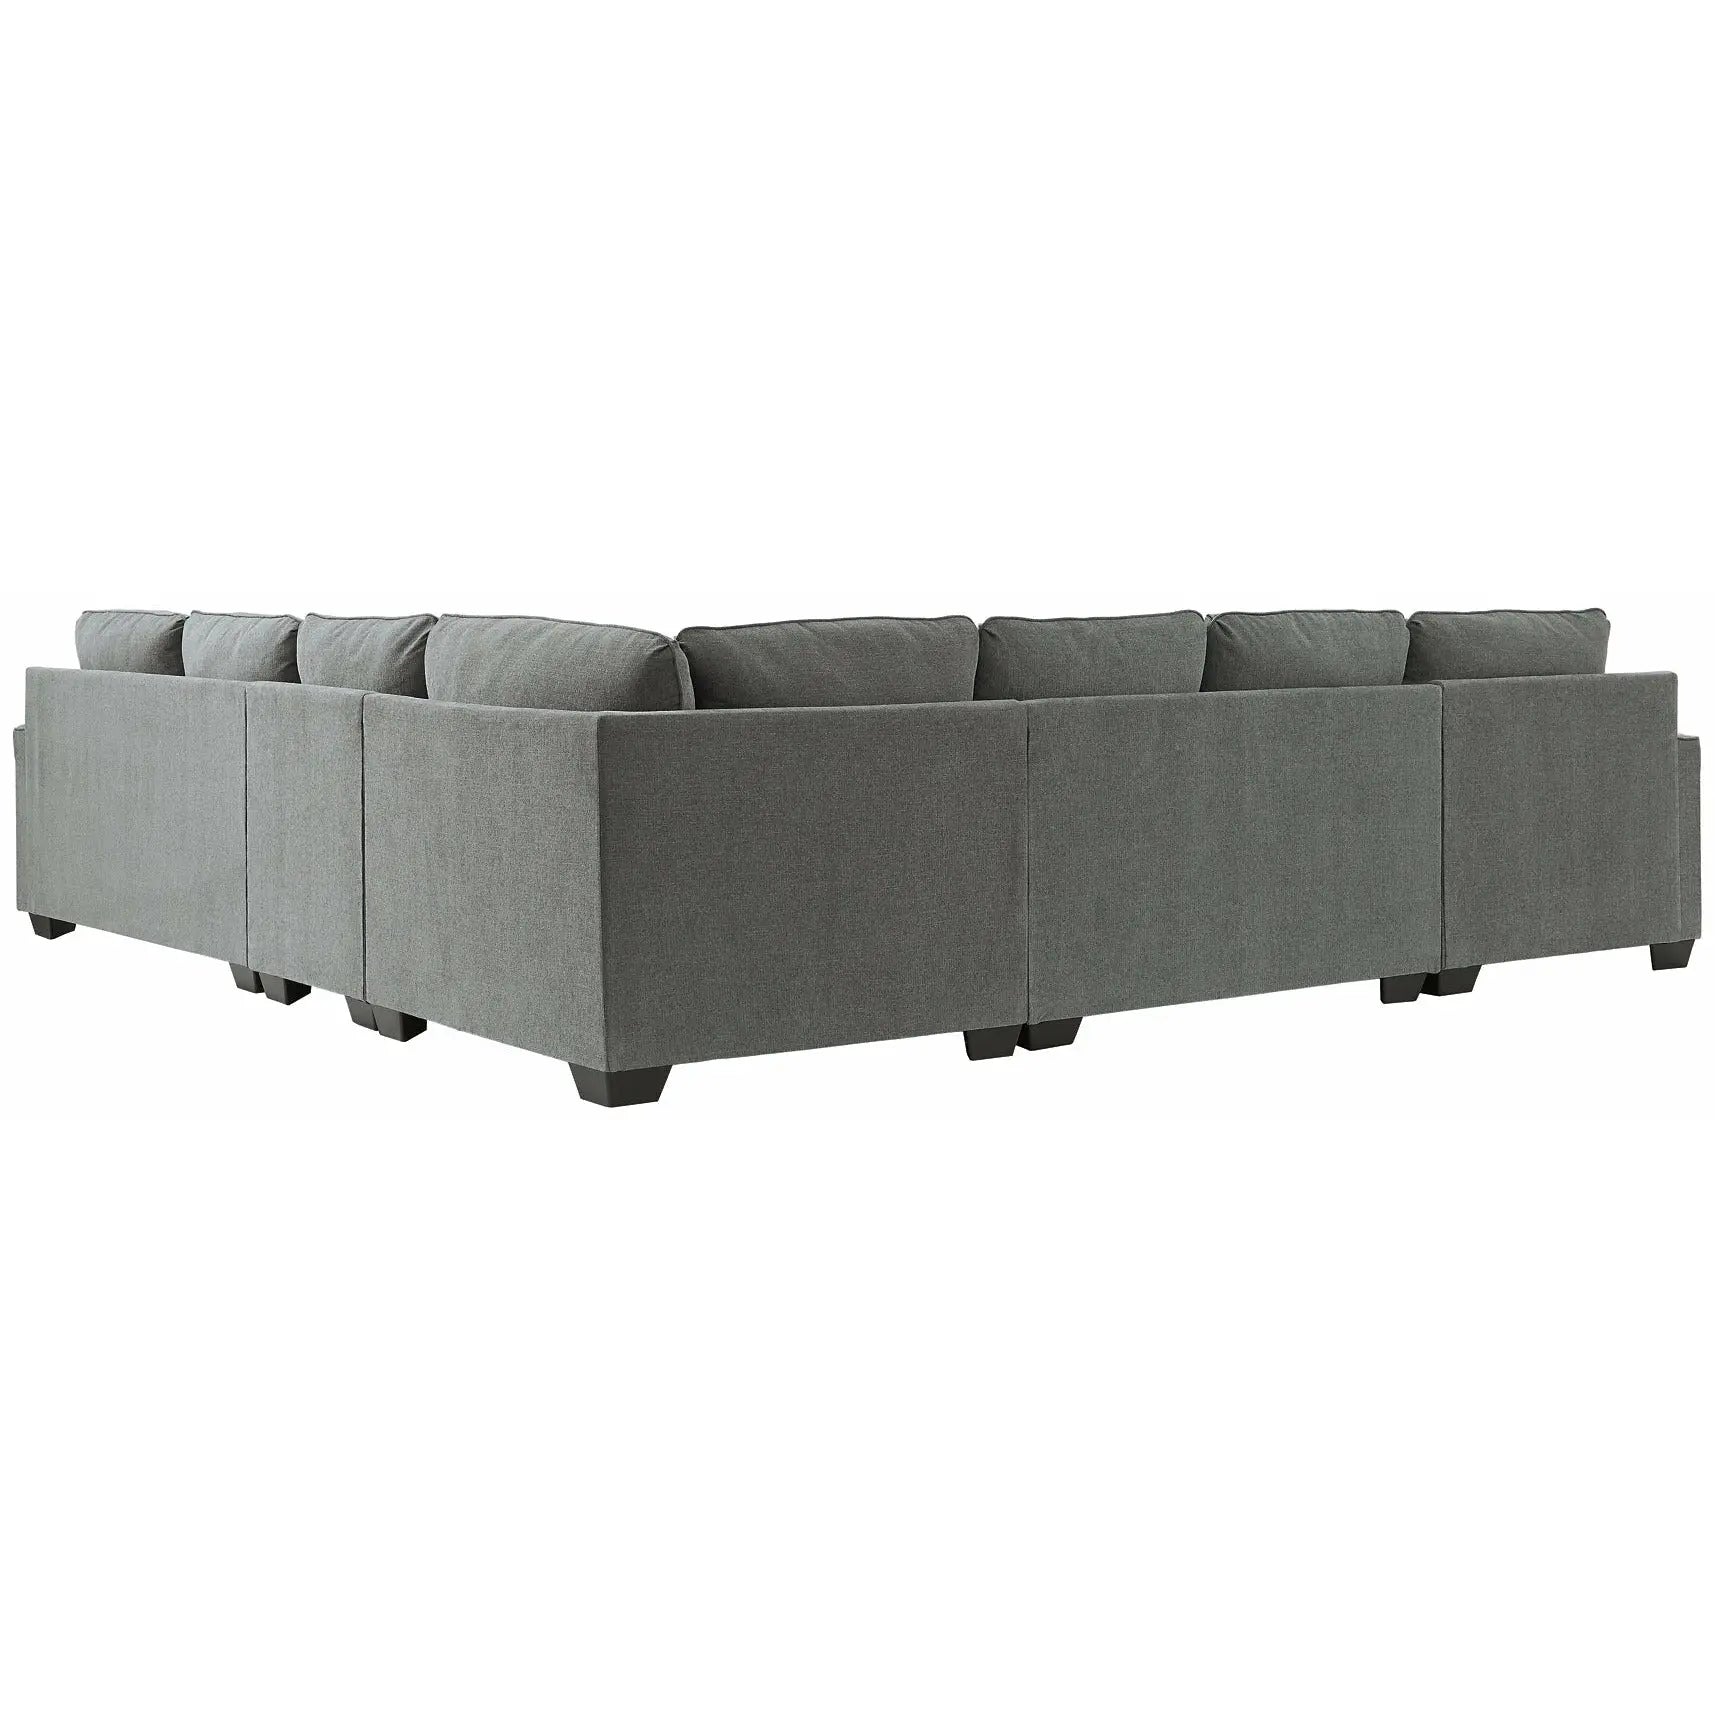 Castano 4-Piece Sectional with Chaise SOFA